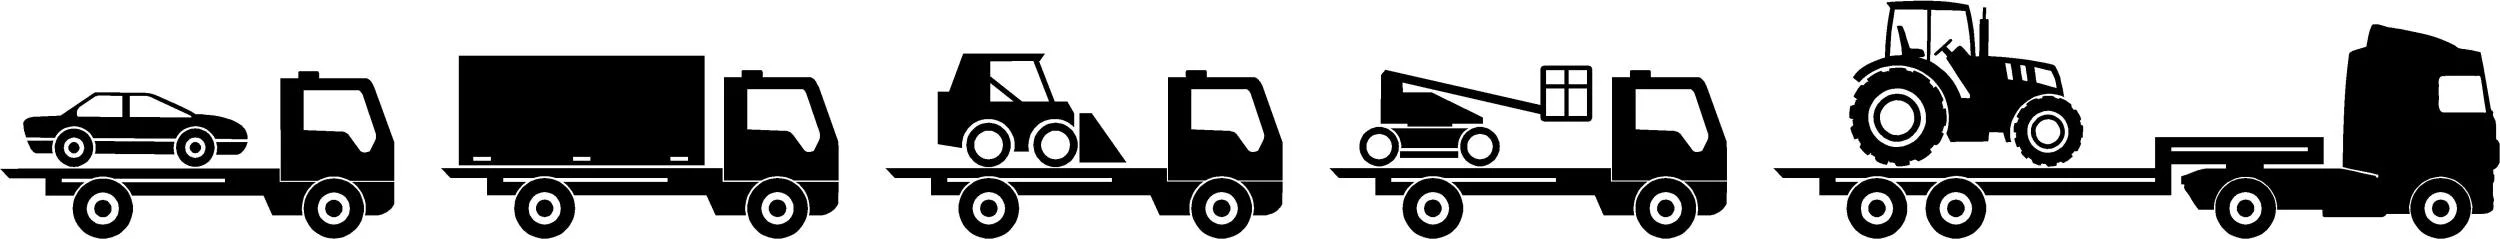 Icons of trucks towing different vehicles